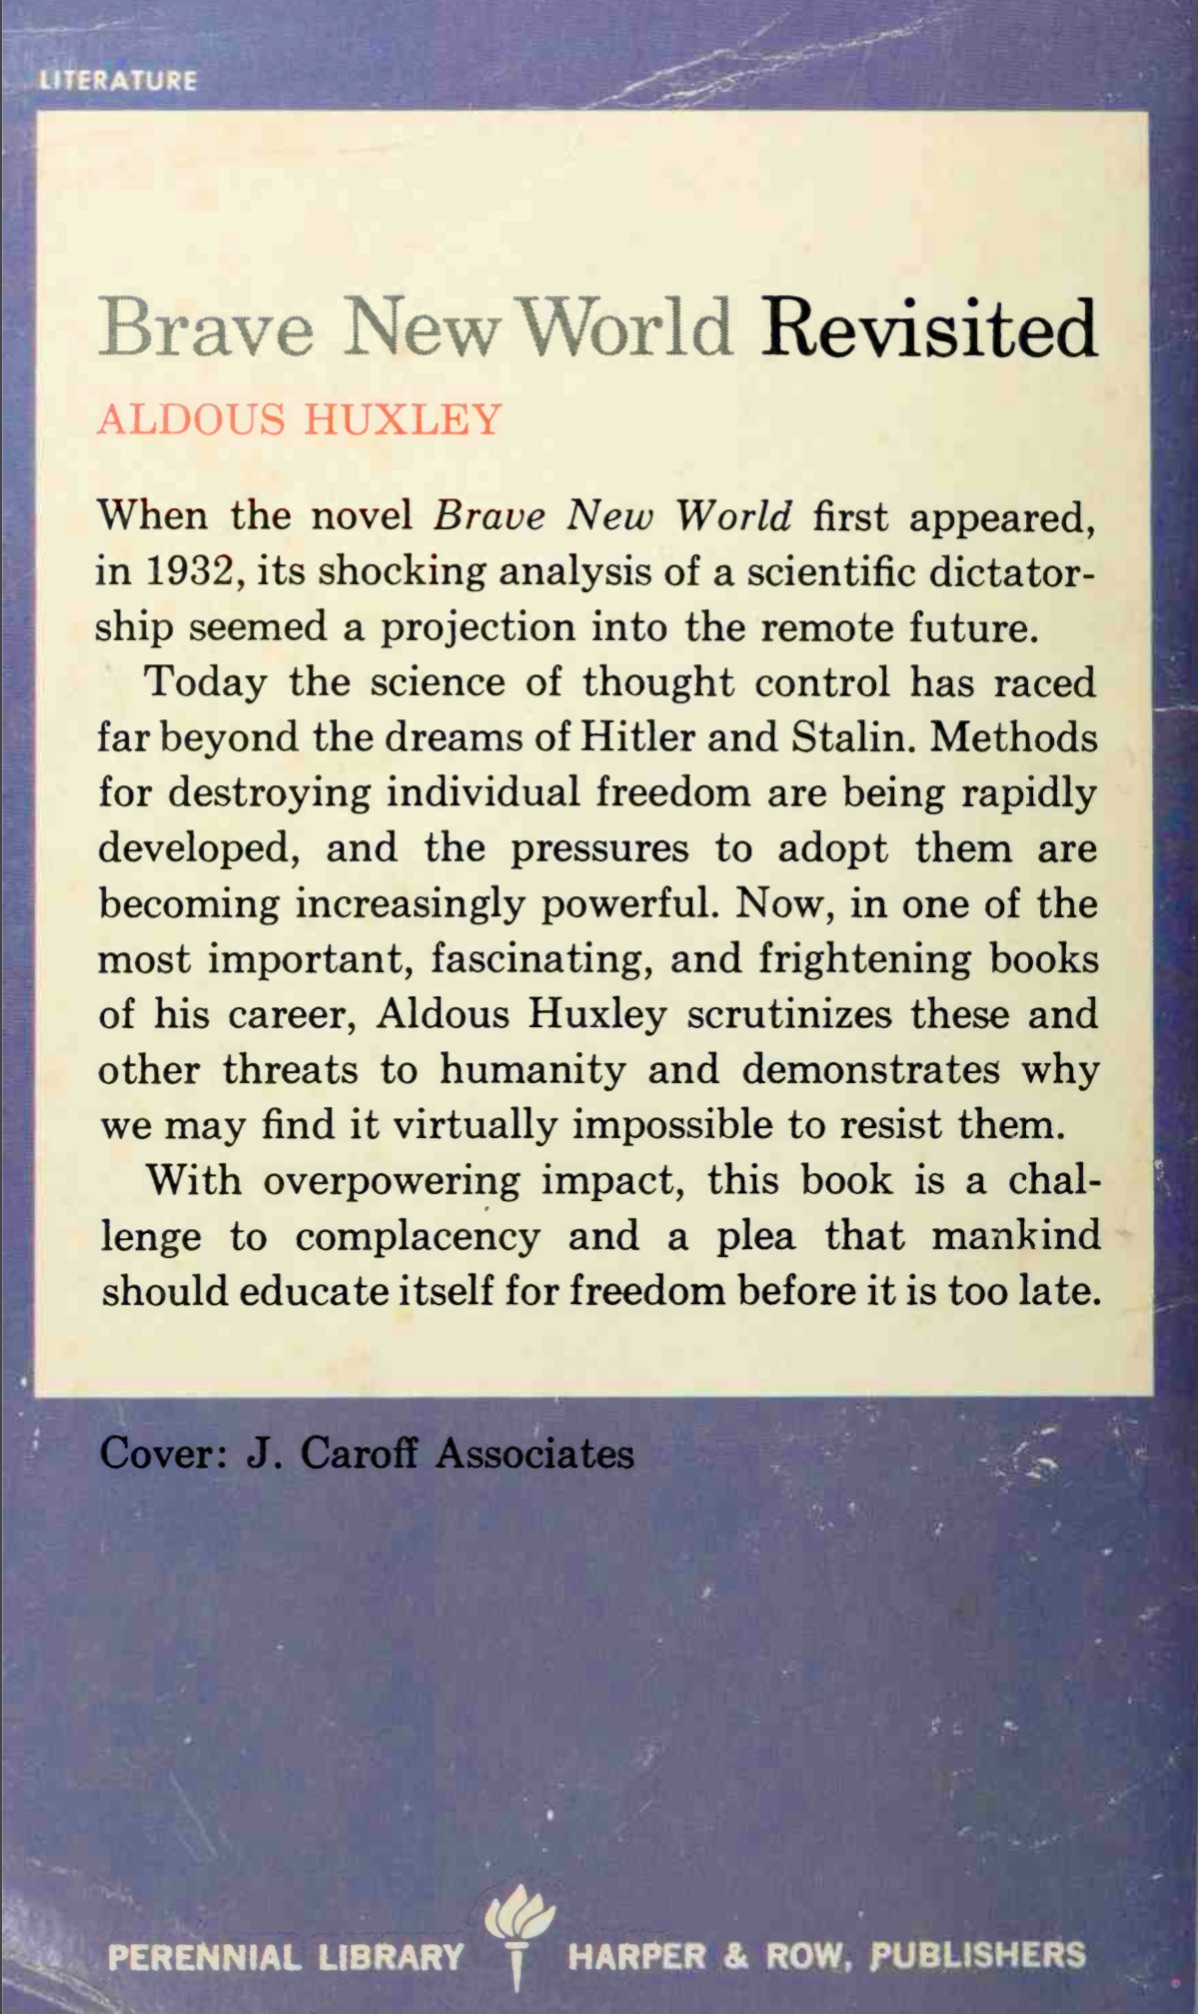 Back cover of Brave New World Revisited (1958) by Aldous Huxley